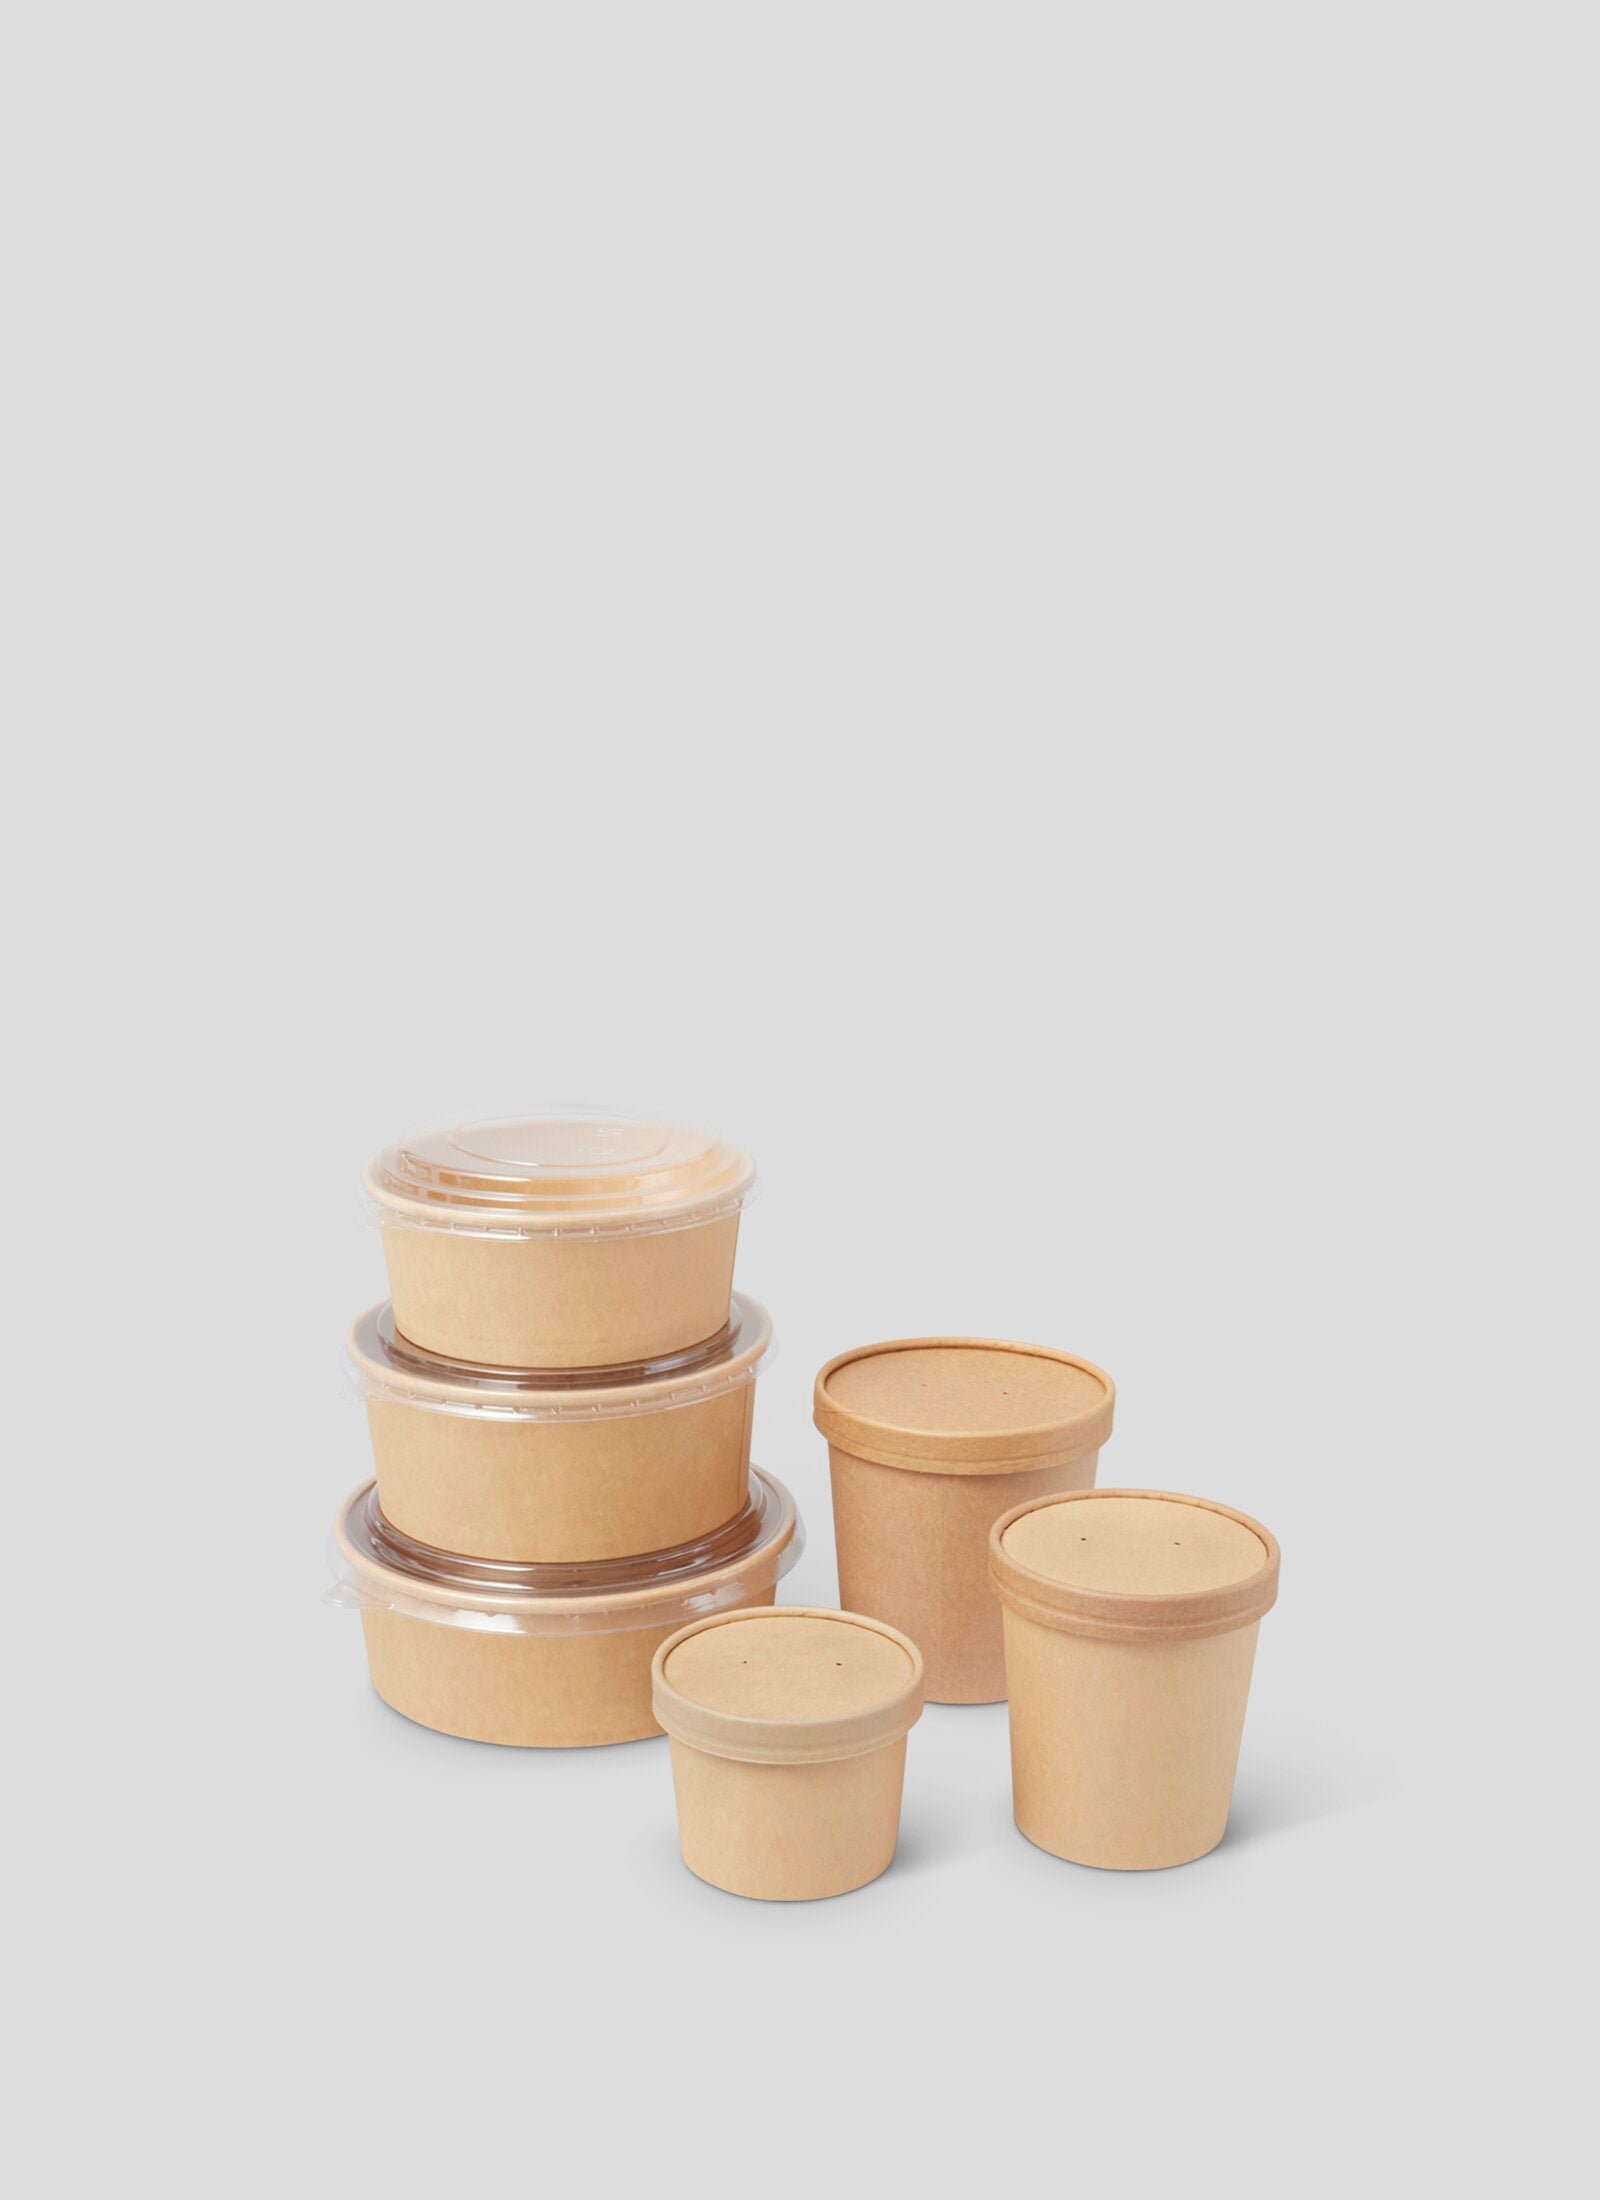 All Bowls from Soyle Sustainable Packaging